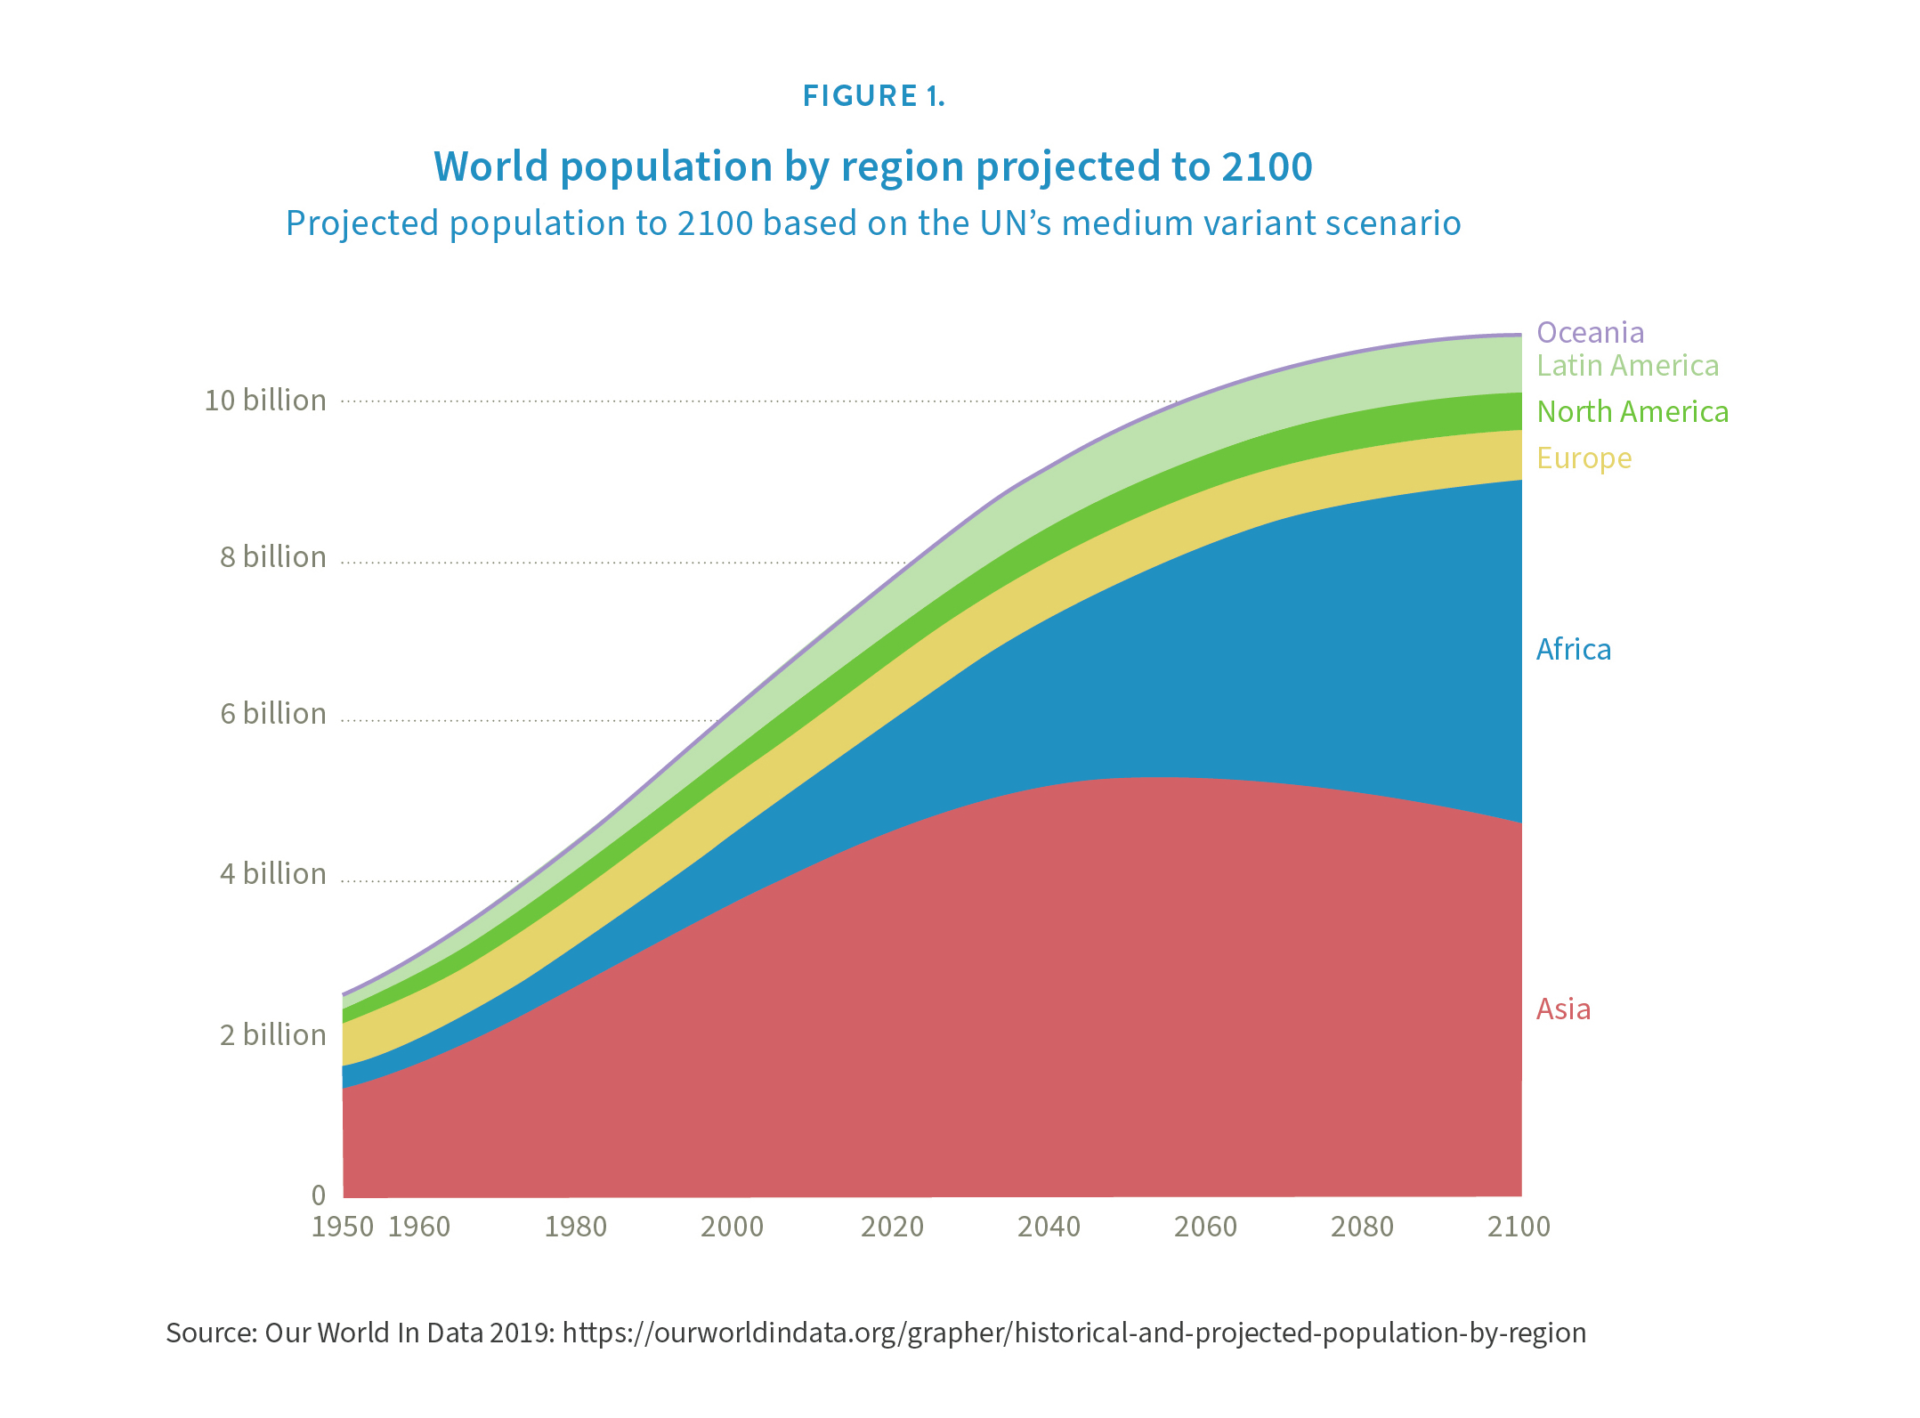 World Population by region projected to 2100, RGB